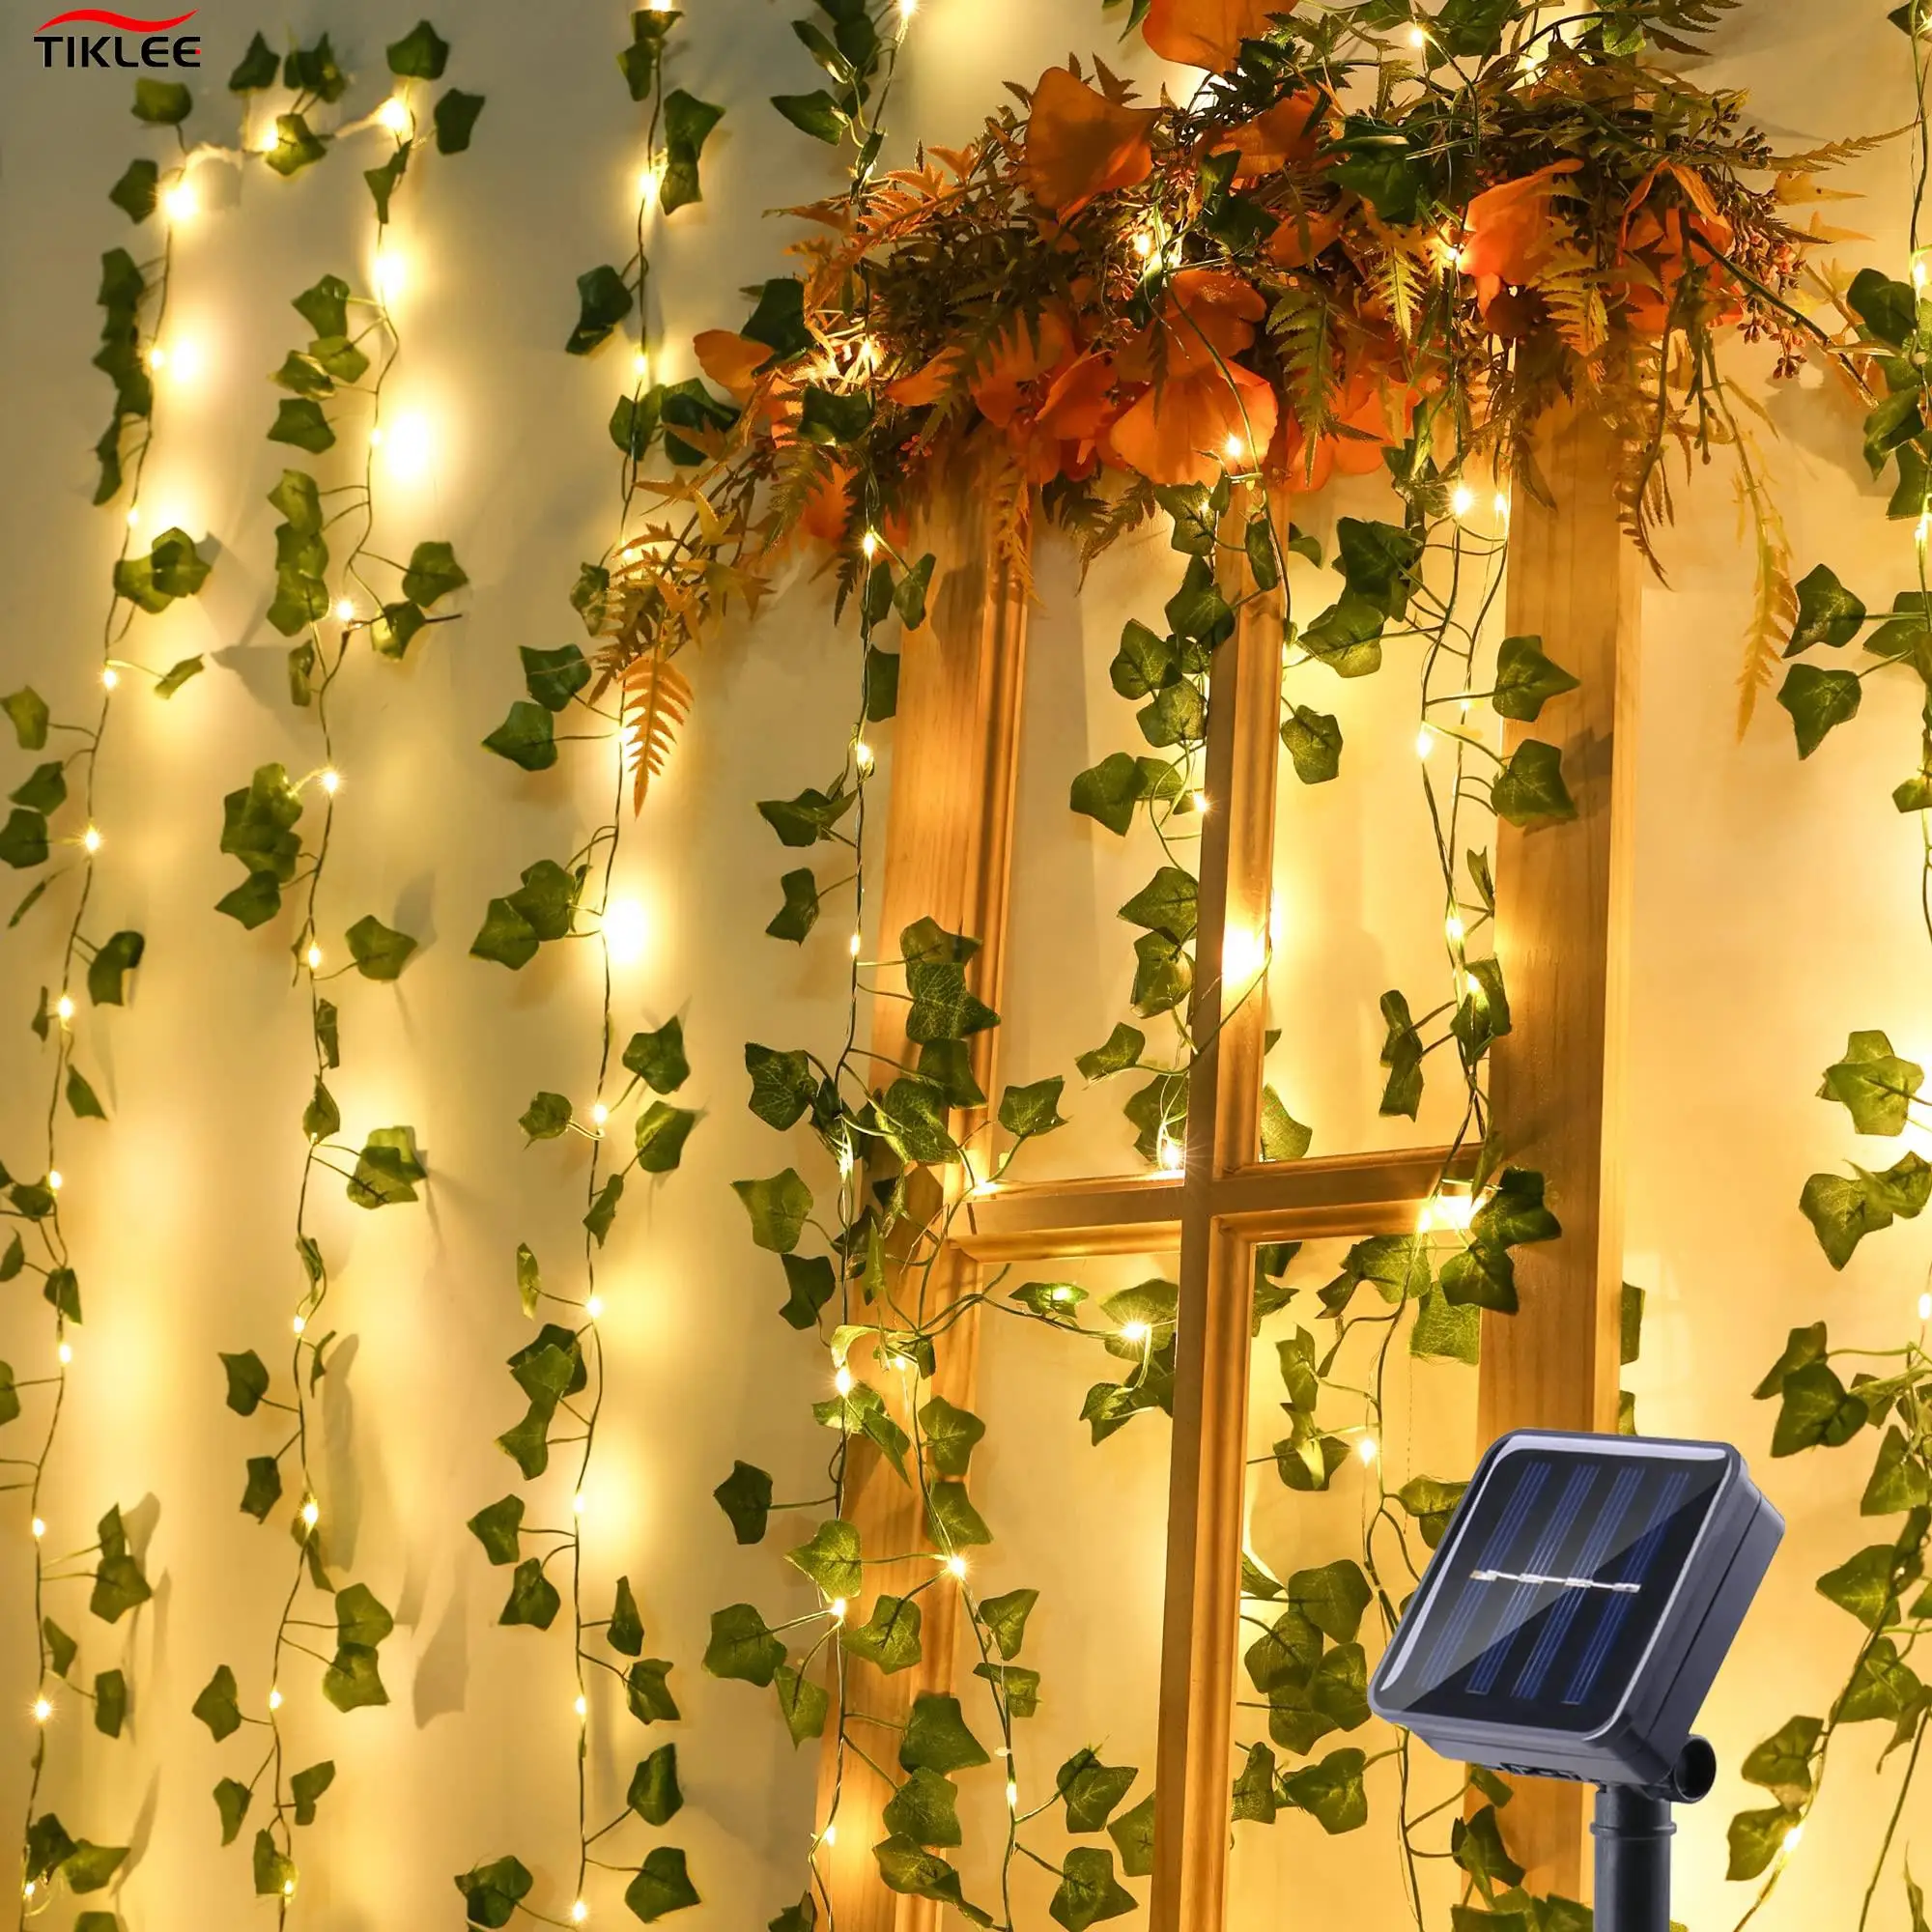 50/100 Solar Leds Green Leaf Fairy Lights String Artificial Ivy Garland Copper Light Strings for Wedding Bedroom Decorations uv stage light small magic ball house projector purple ultra violet mask remote ktv lights show lumiere dj bedroom decorations